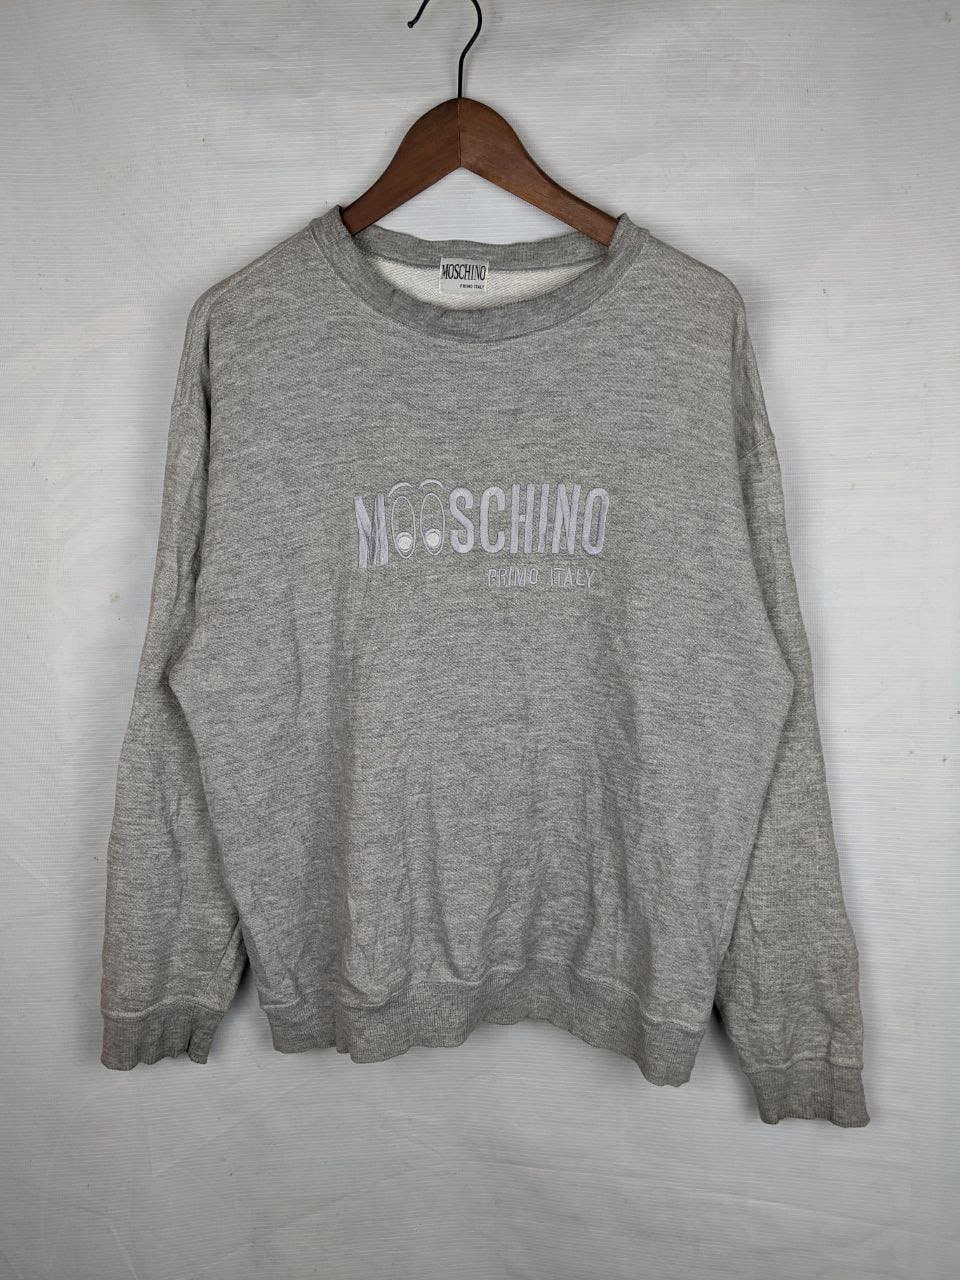 moschino spell out big logo's on chest sweatshirt - 1